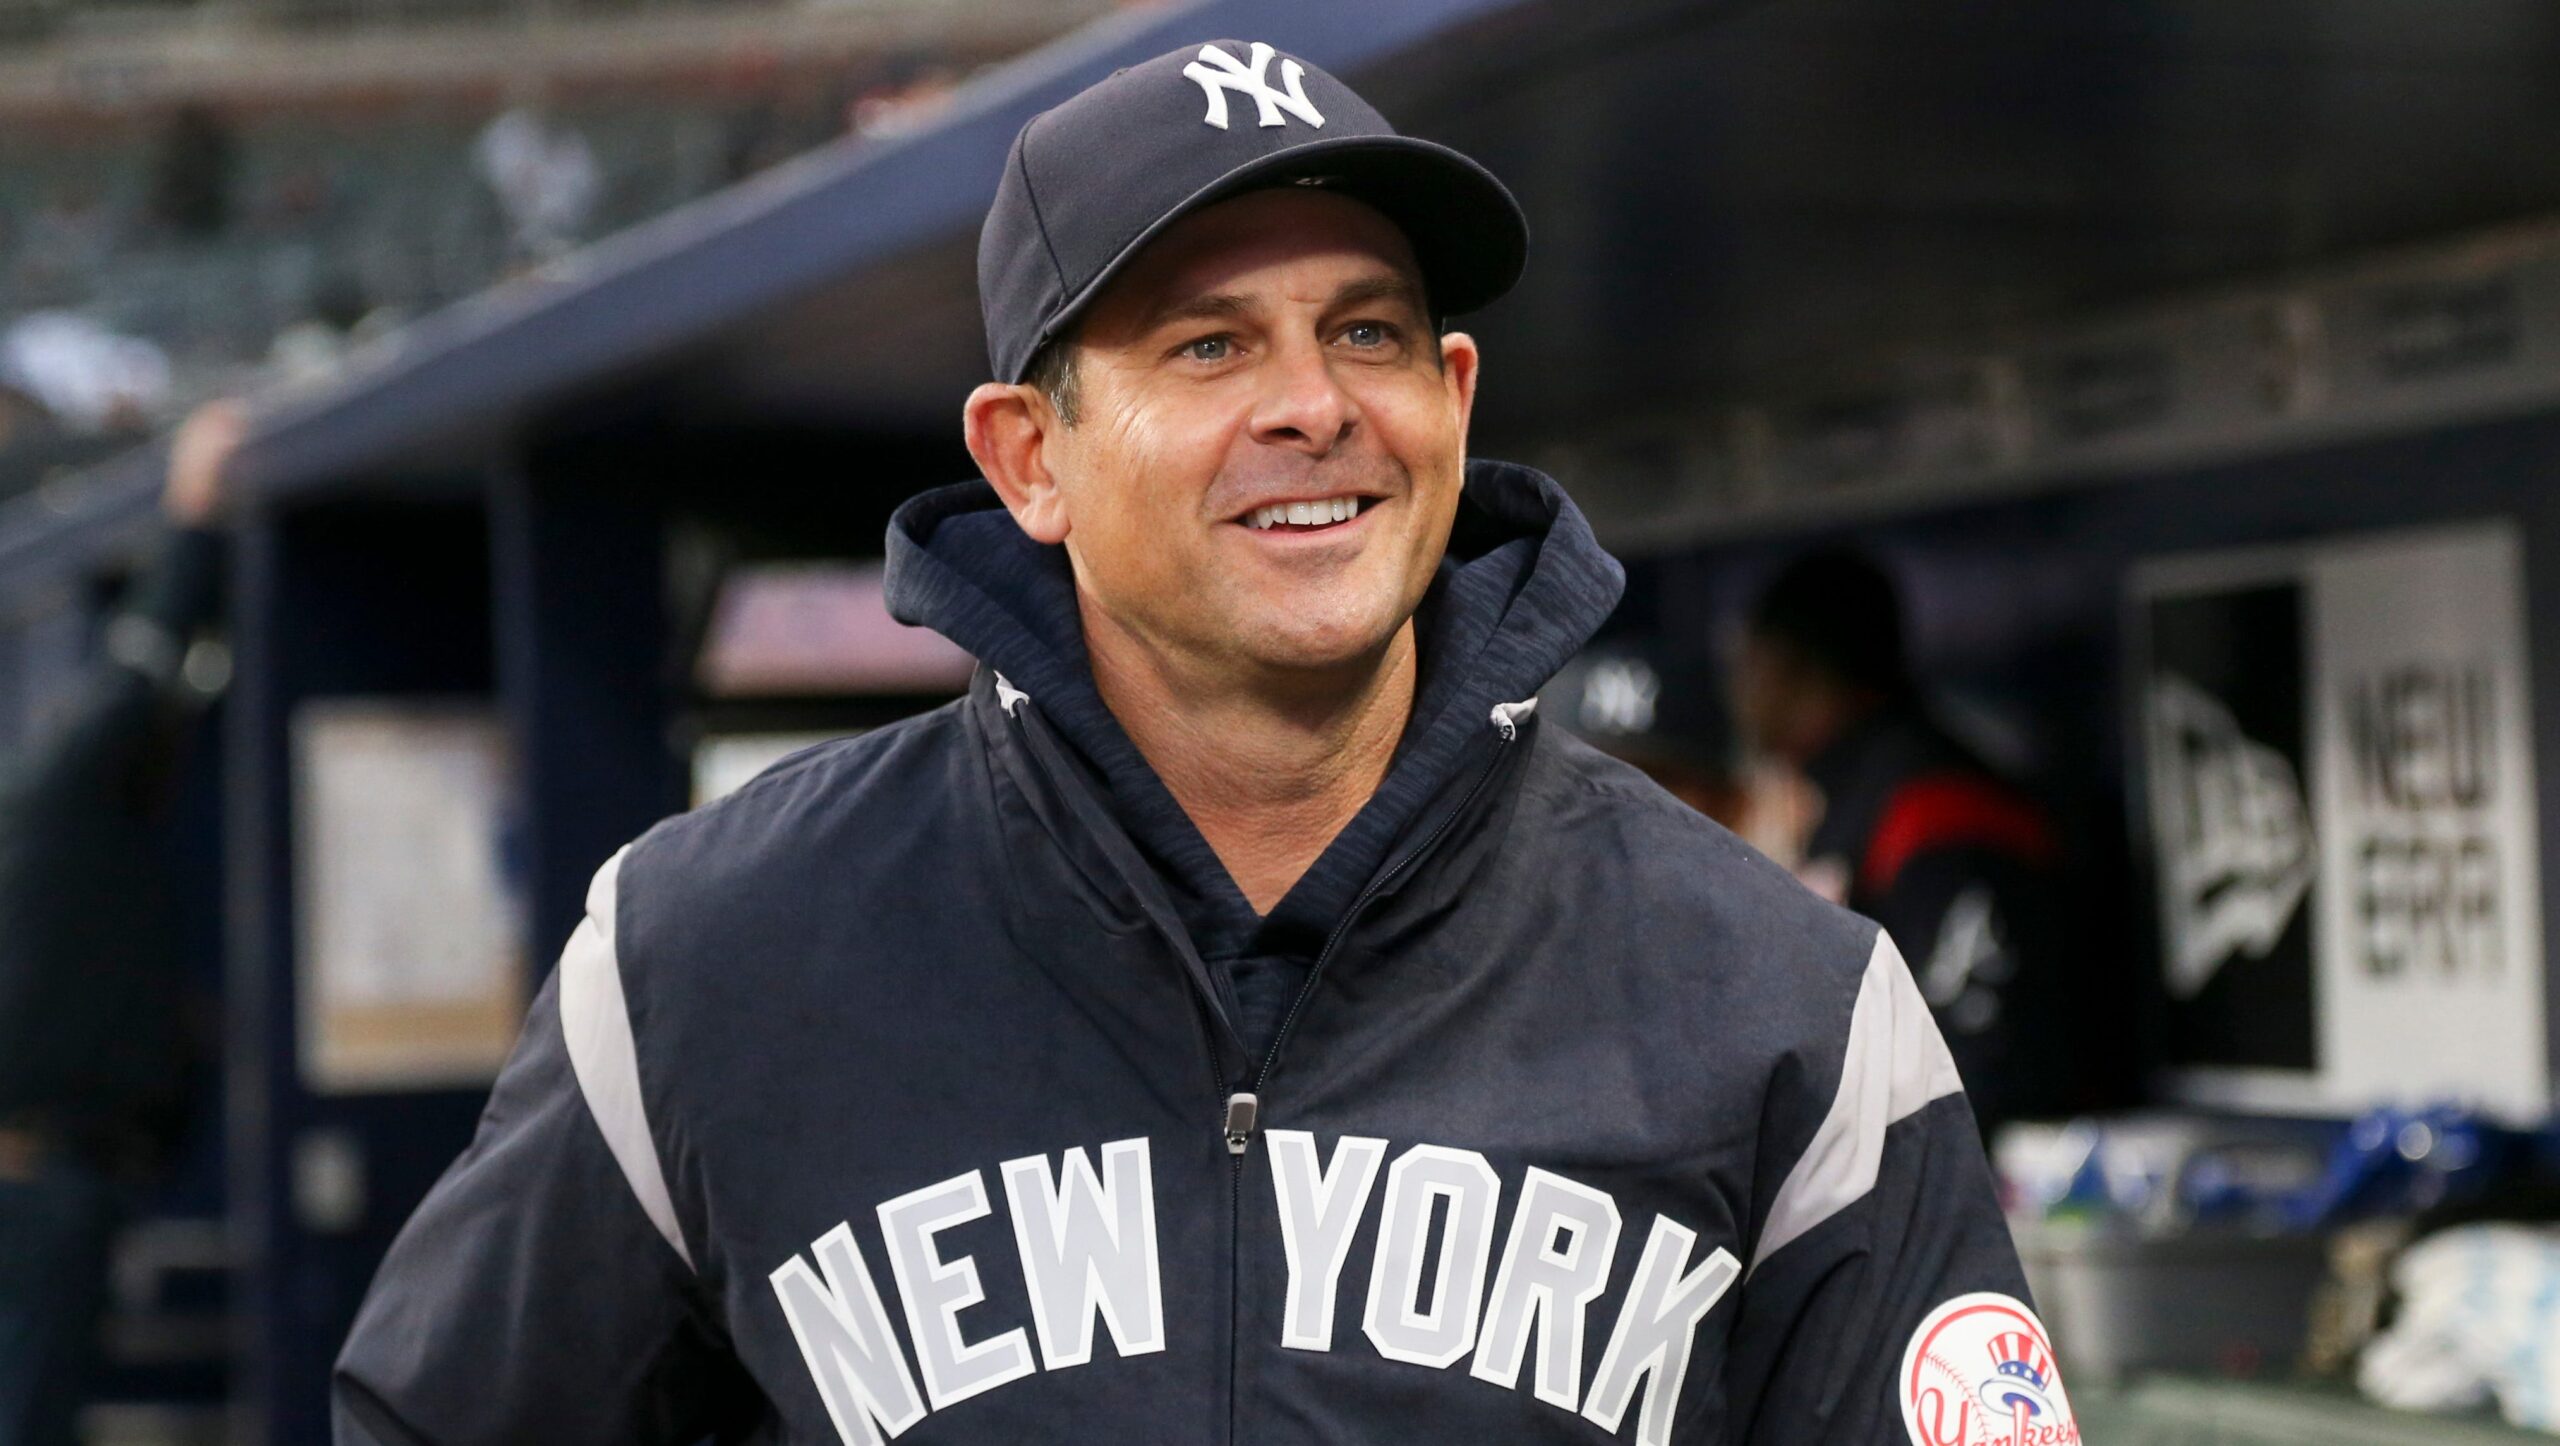 Aaron Boone's No. 17? It's Personal, Not Motivational - The New